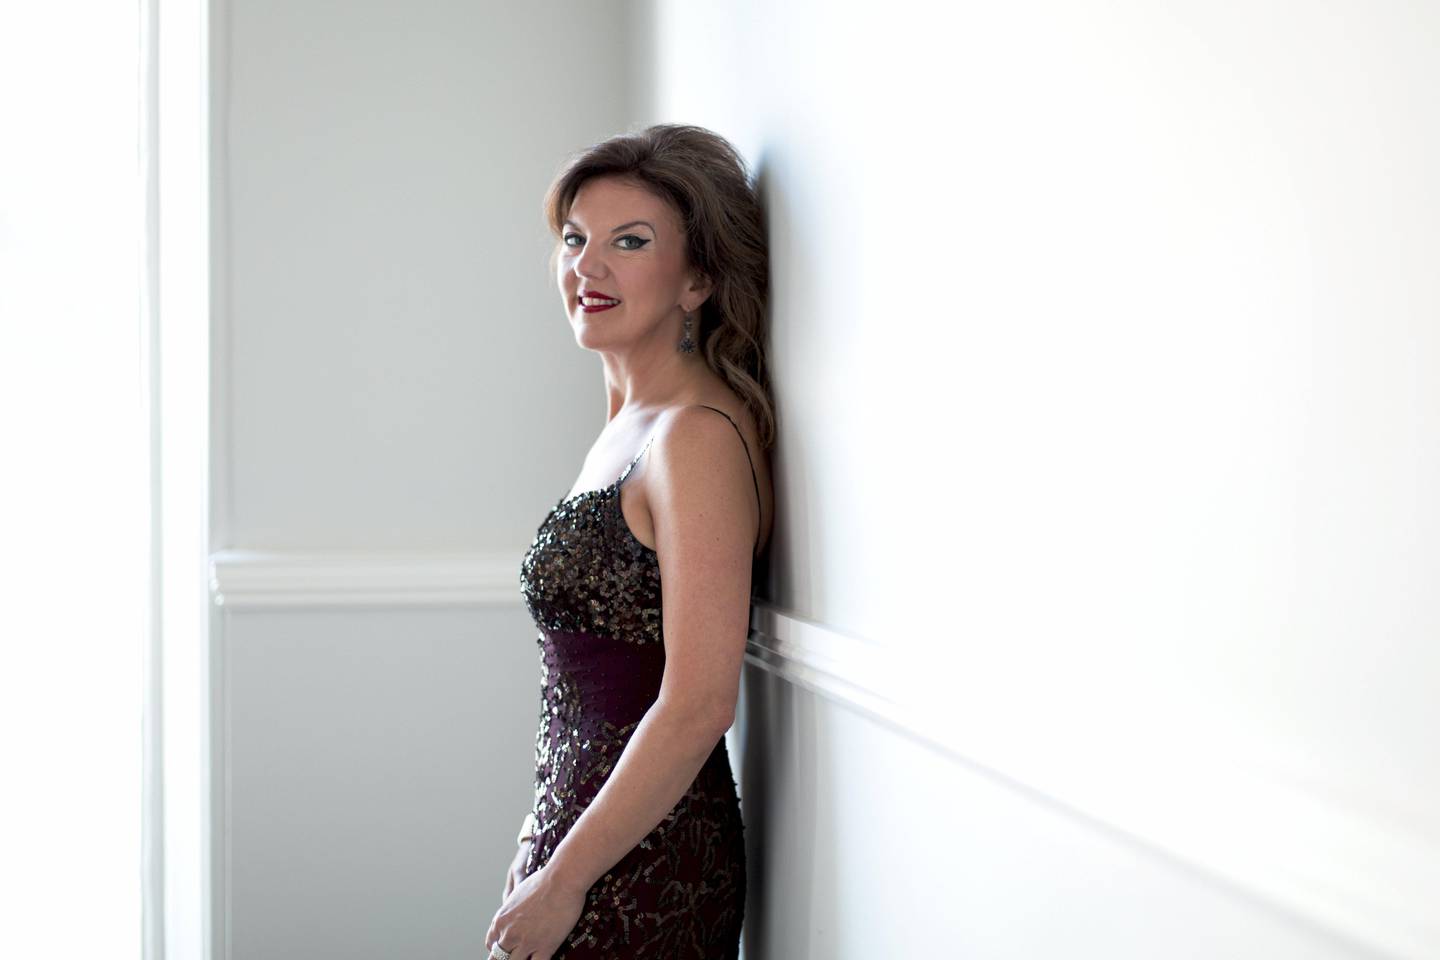 Tasmin Little29 August 2013Bishop Strings and Oh! Studios, LondonHair & make up: Elizabeth RitaAssistant: Peter Finlayjoint commission: Tasmin Little for publicity and Chandos for CD covers